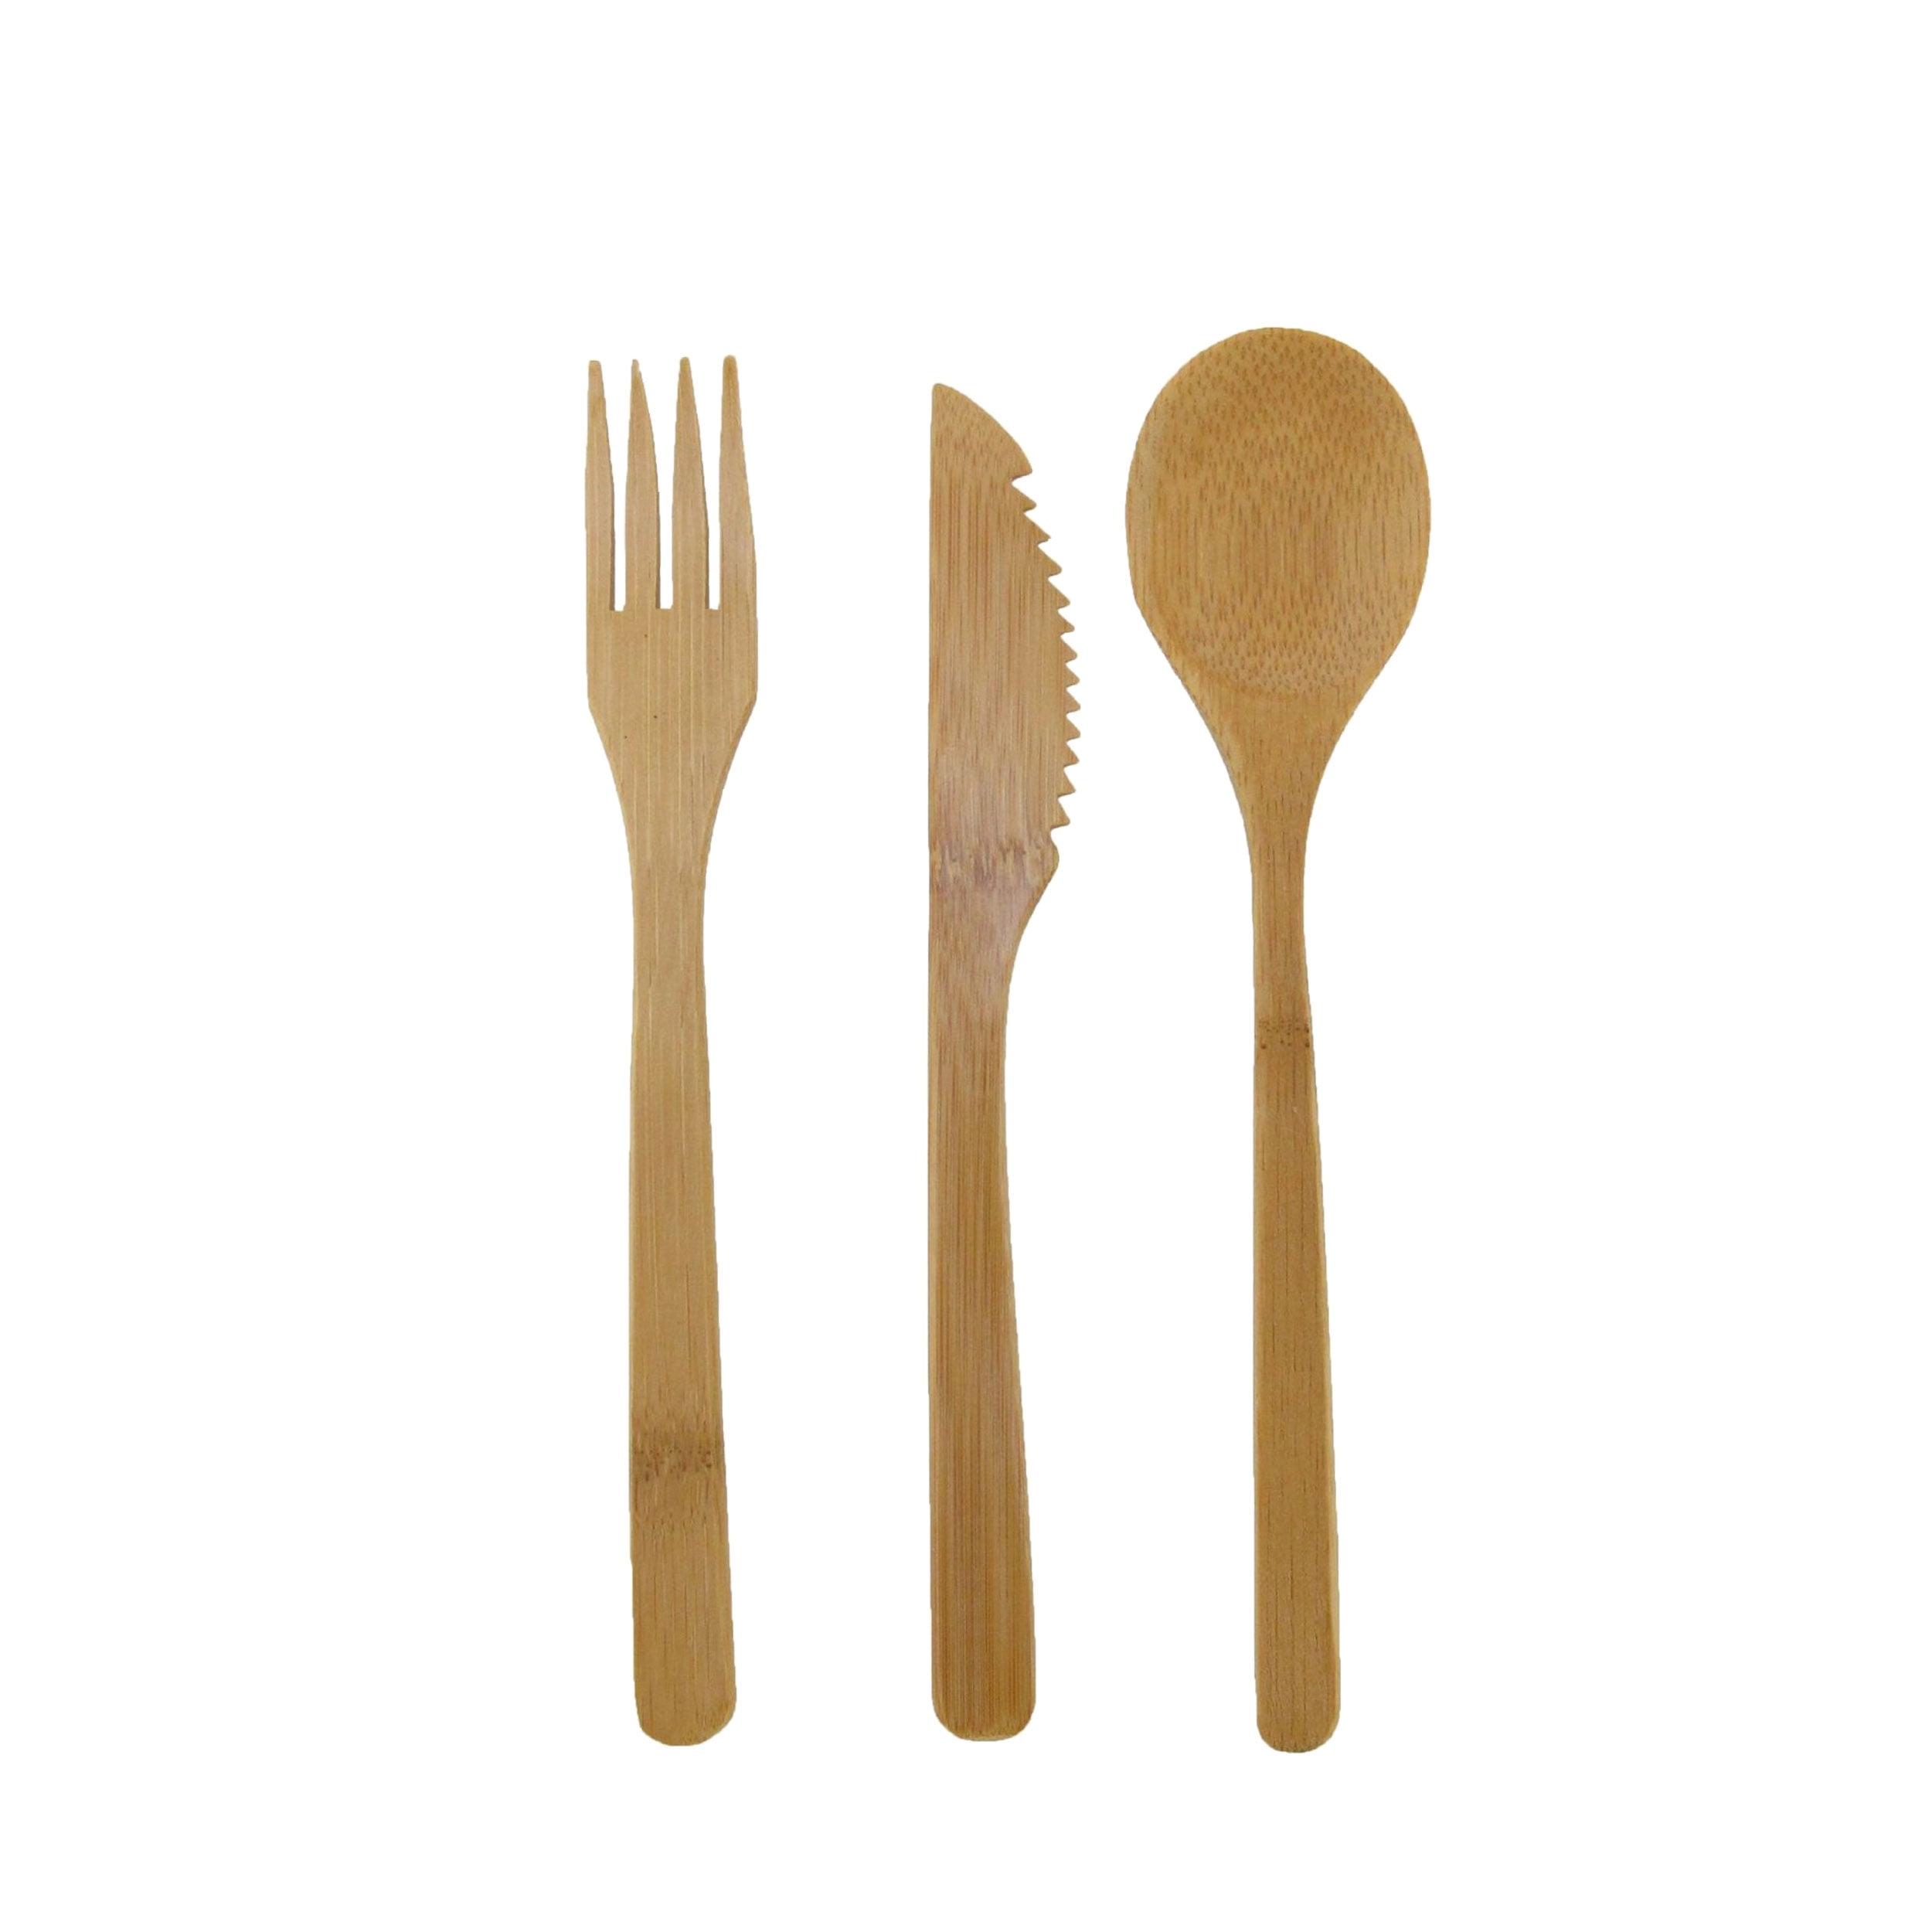 3 Spoons Pack of 6 To Go Ware Kids Reusable Bamboo Utensils 3 Forks Bamboo Utensils Eco Friendly 